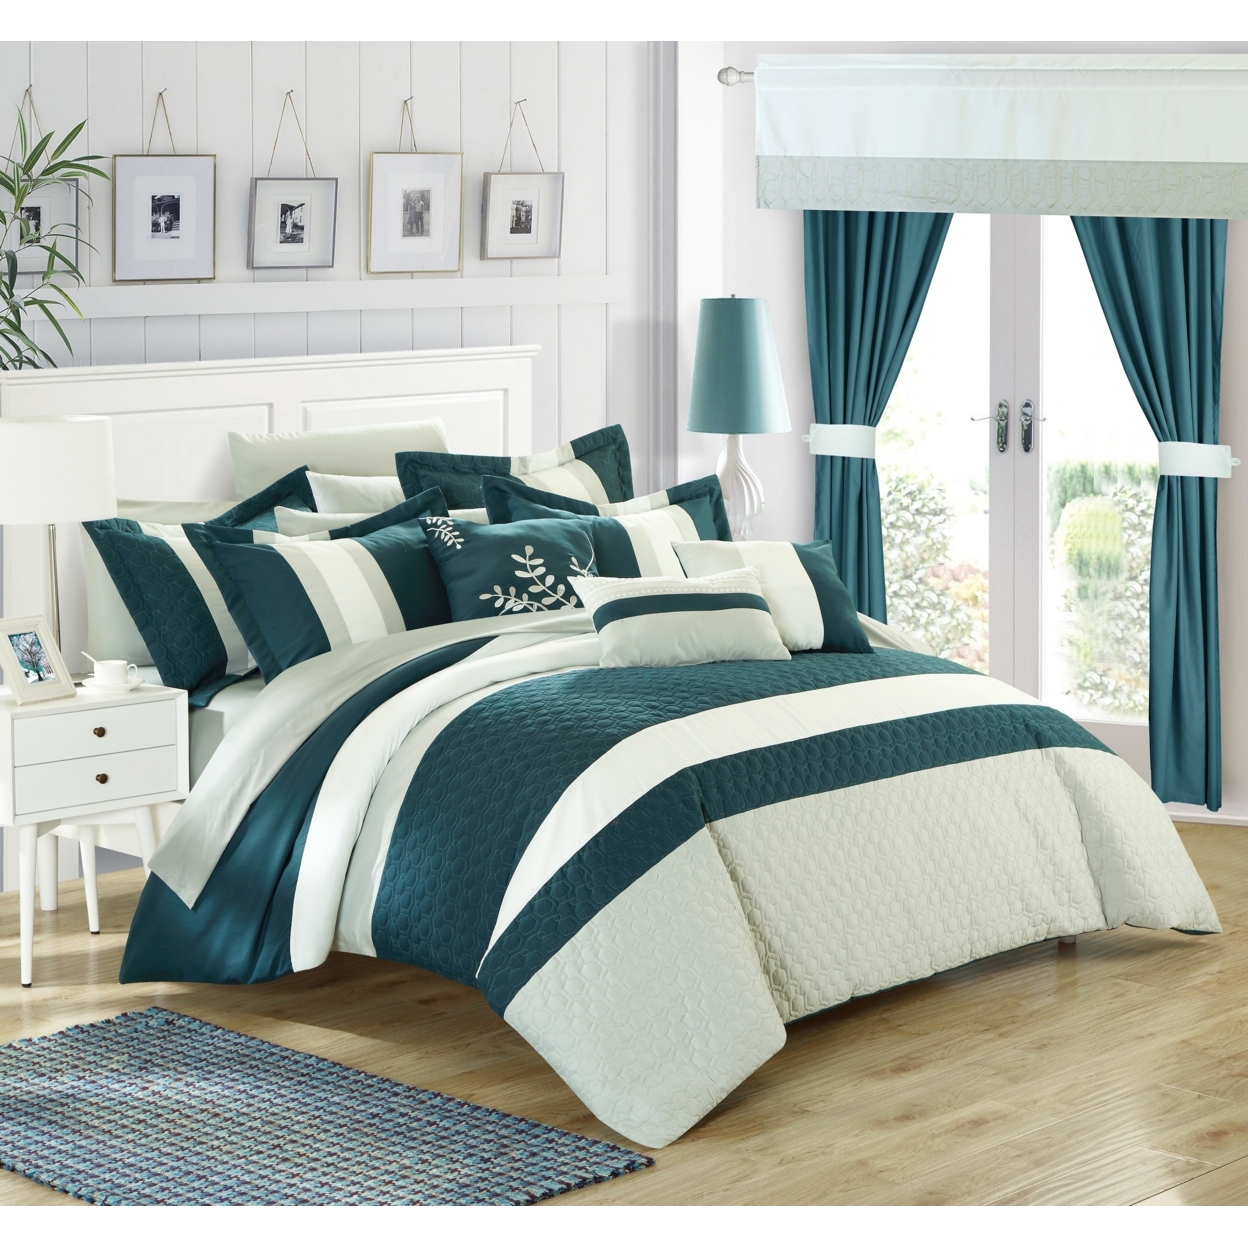 Chic Home 24 Piece Placido Complete Bedroom Set With Octagon Embroidery Color Block Pattern - Teal, Queen